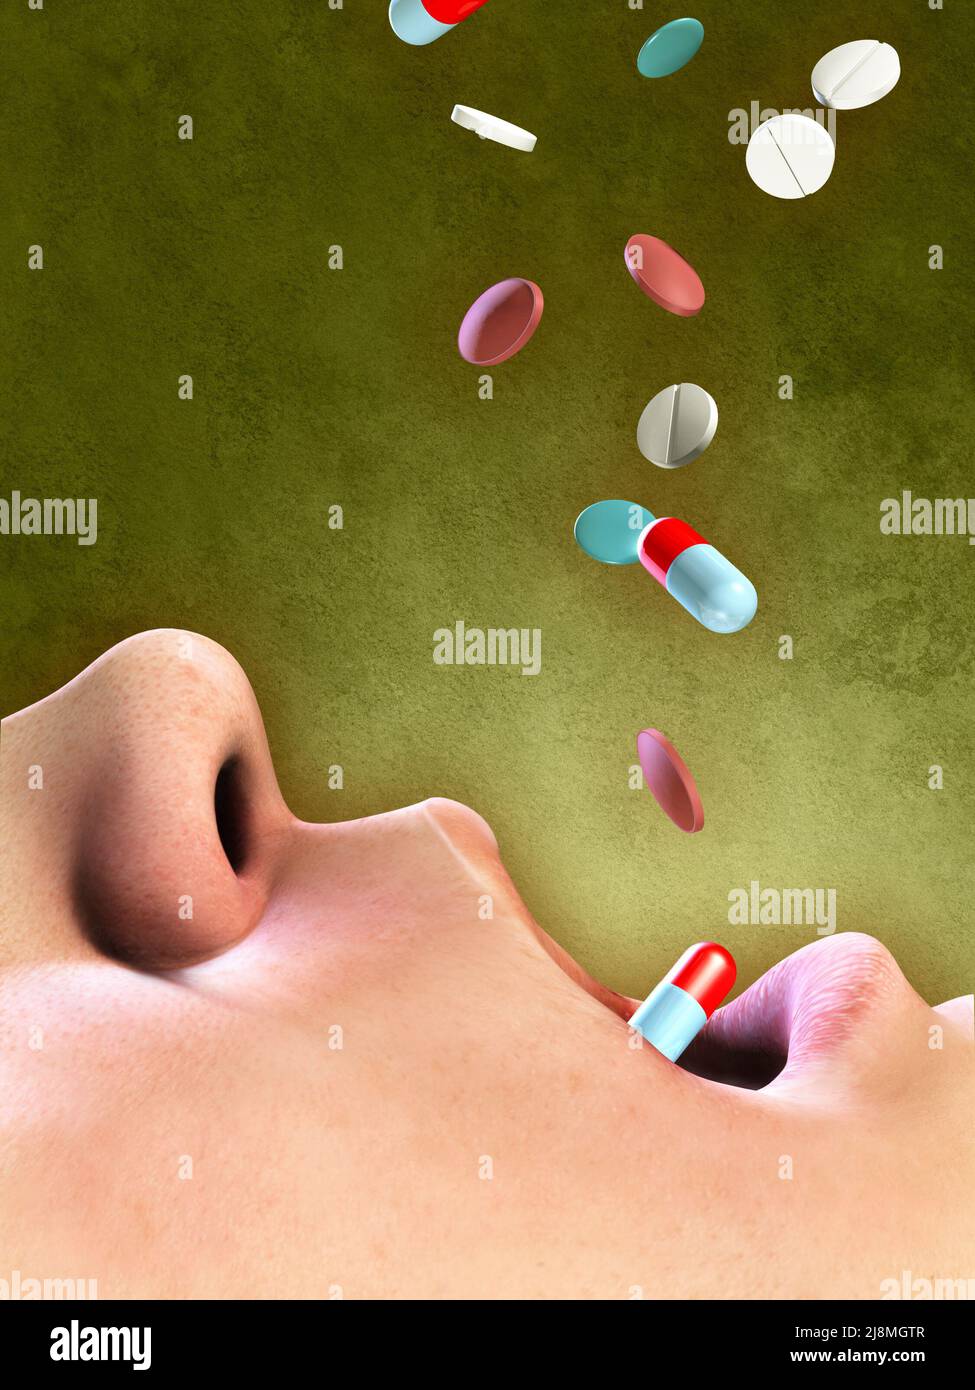 Different pills falling into an open mouth. Digital illustration. Stock Photo